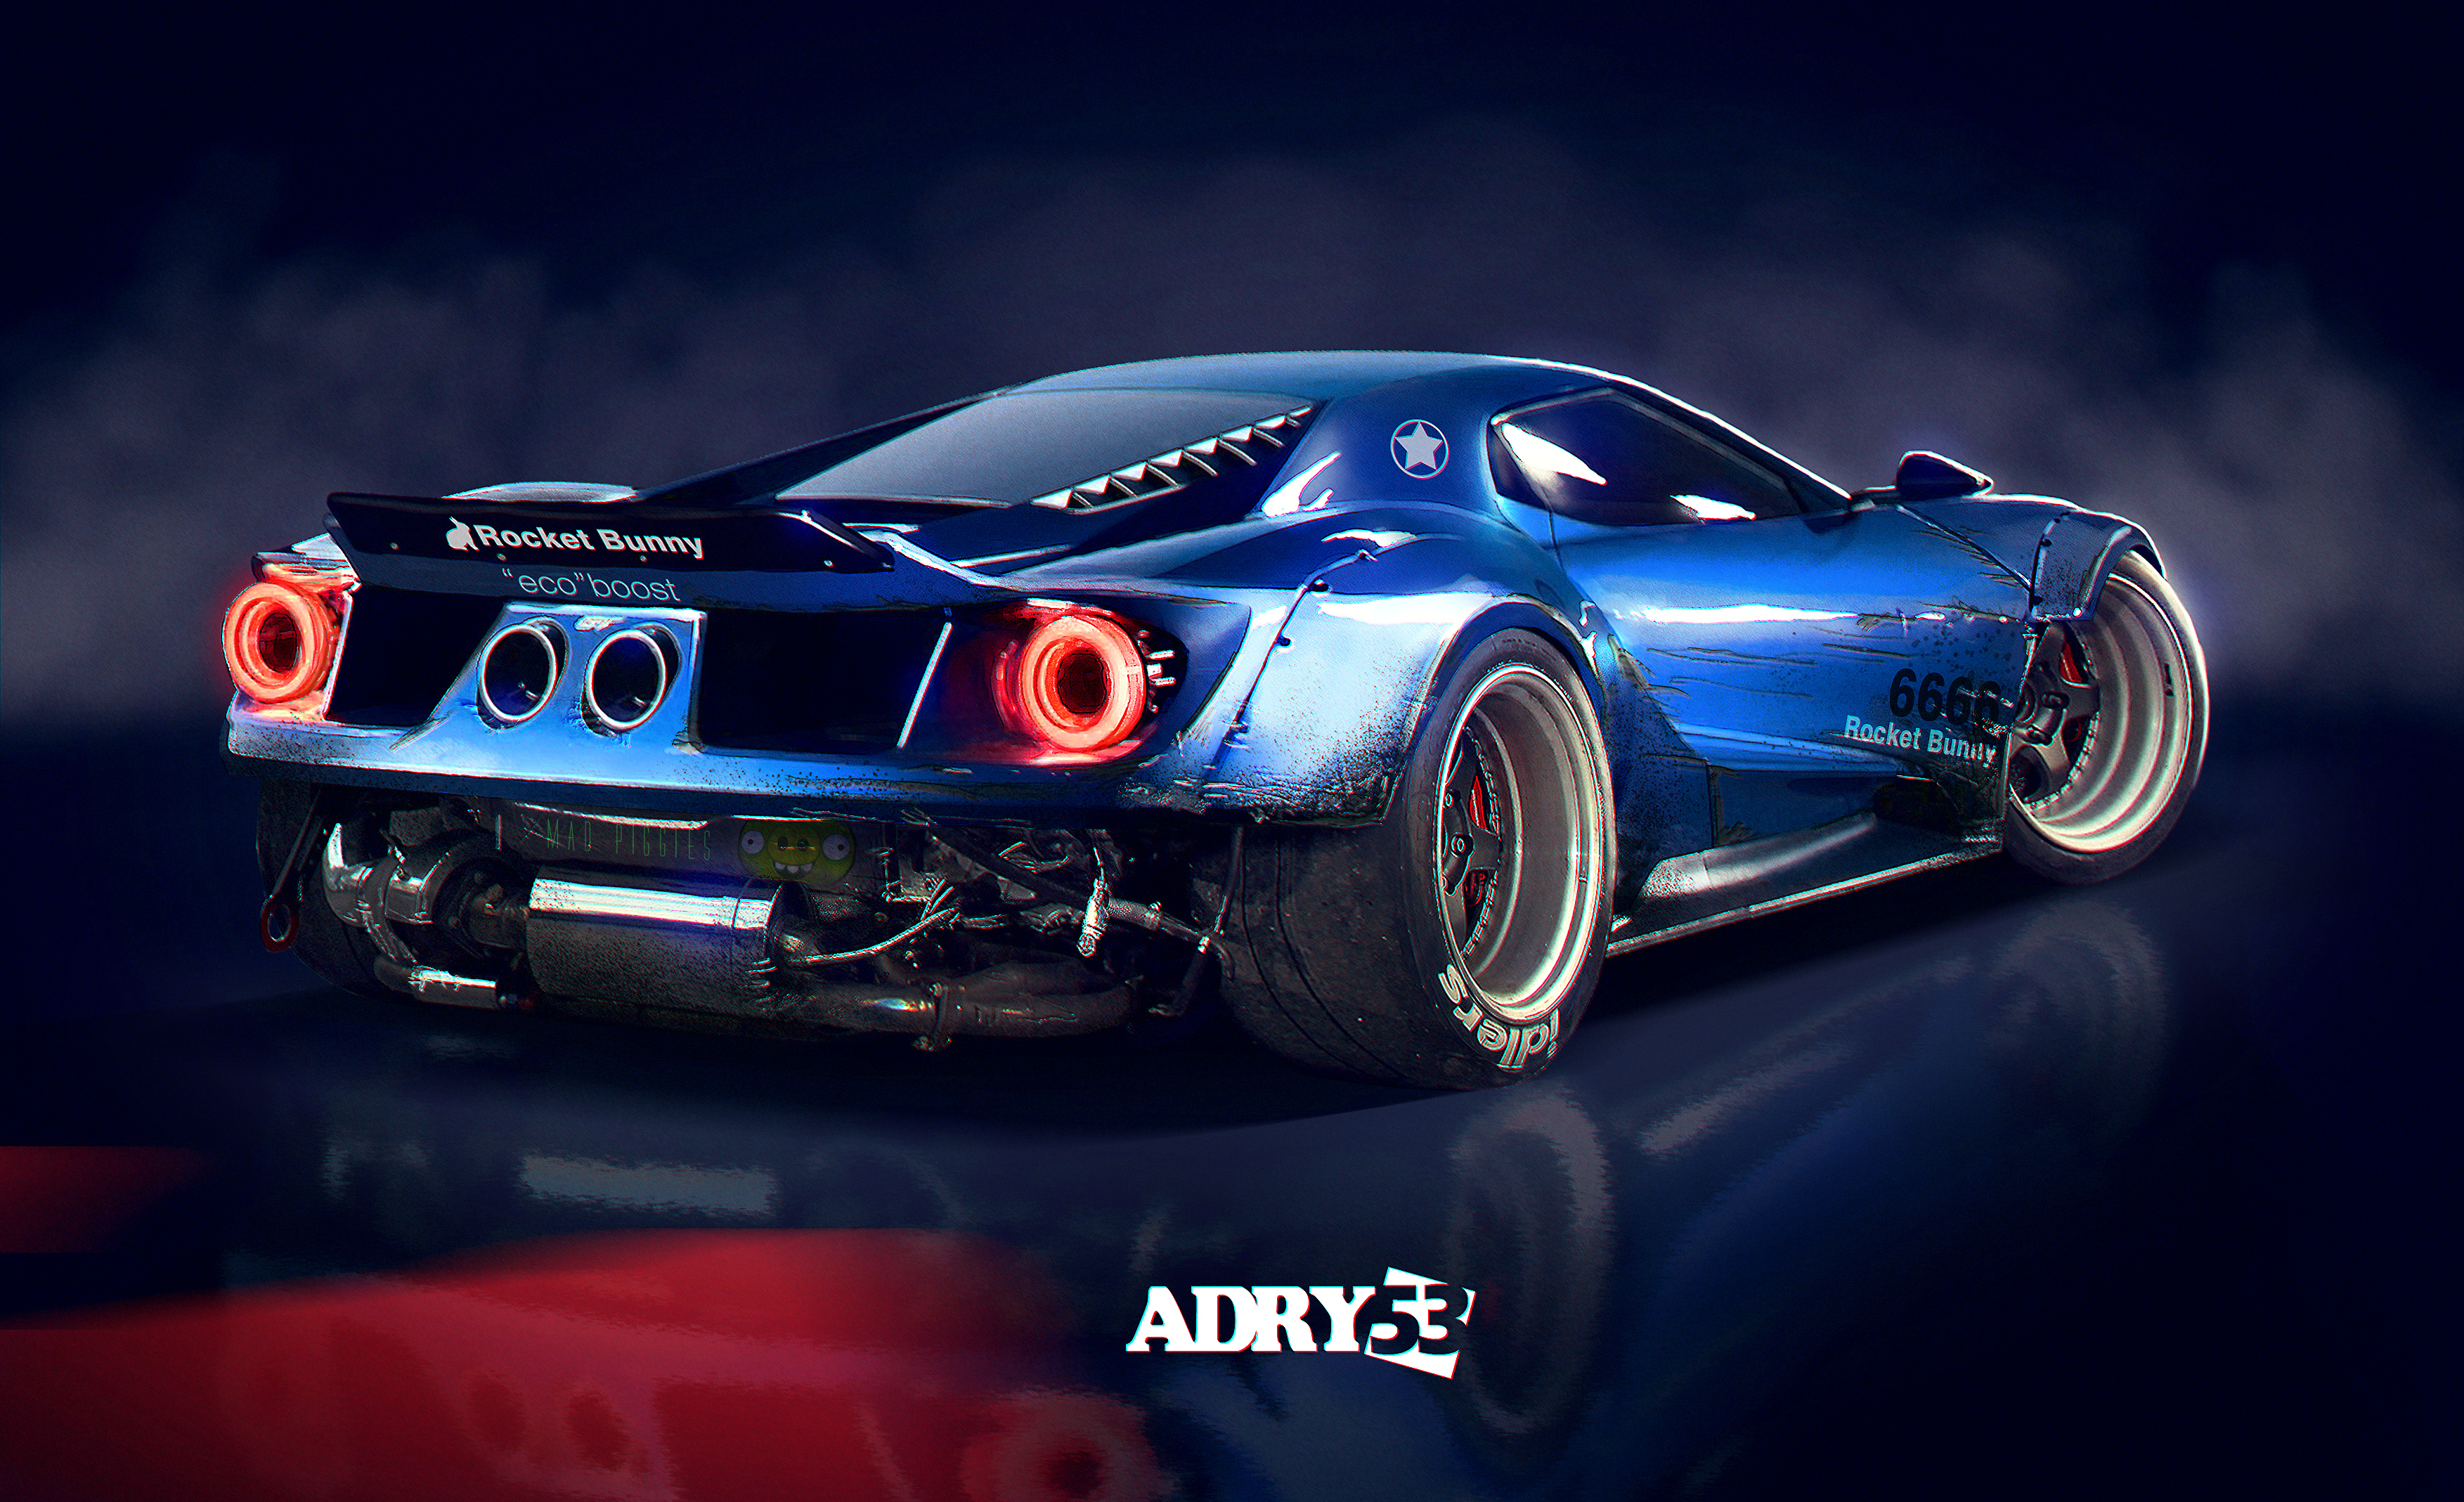 Ford Gt Rocket Bunny By Adry53